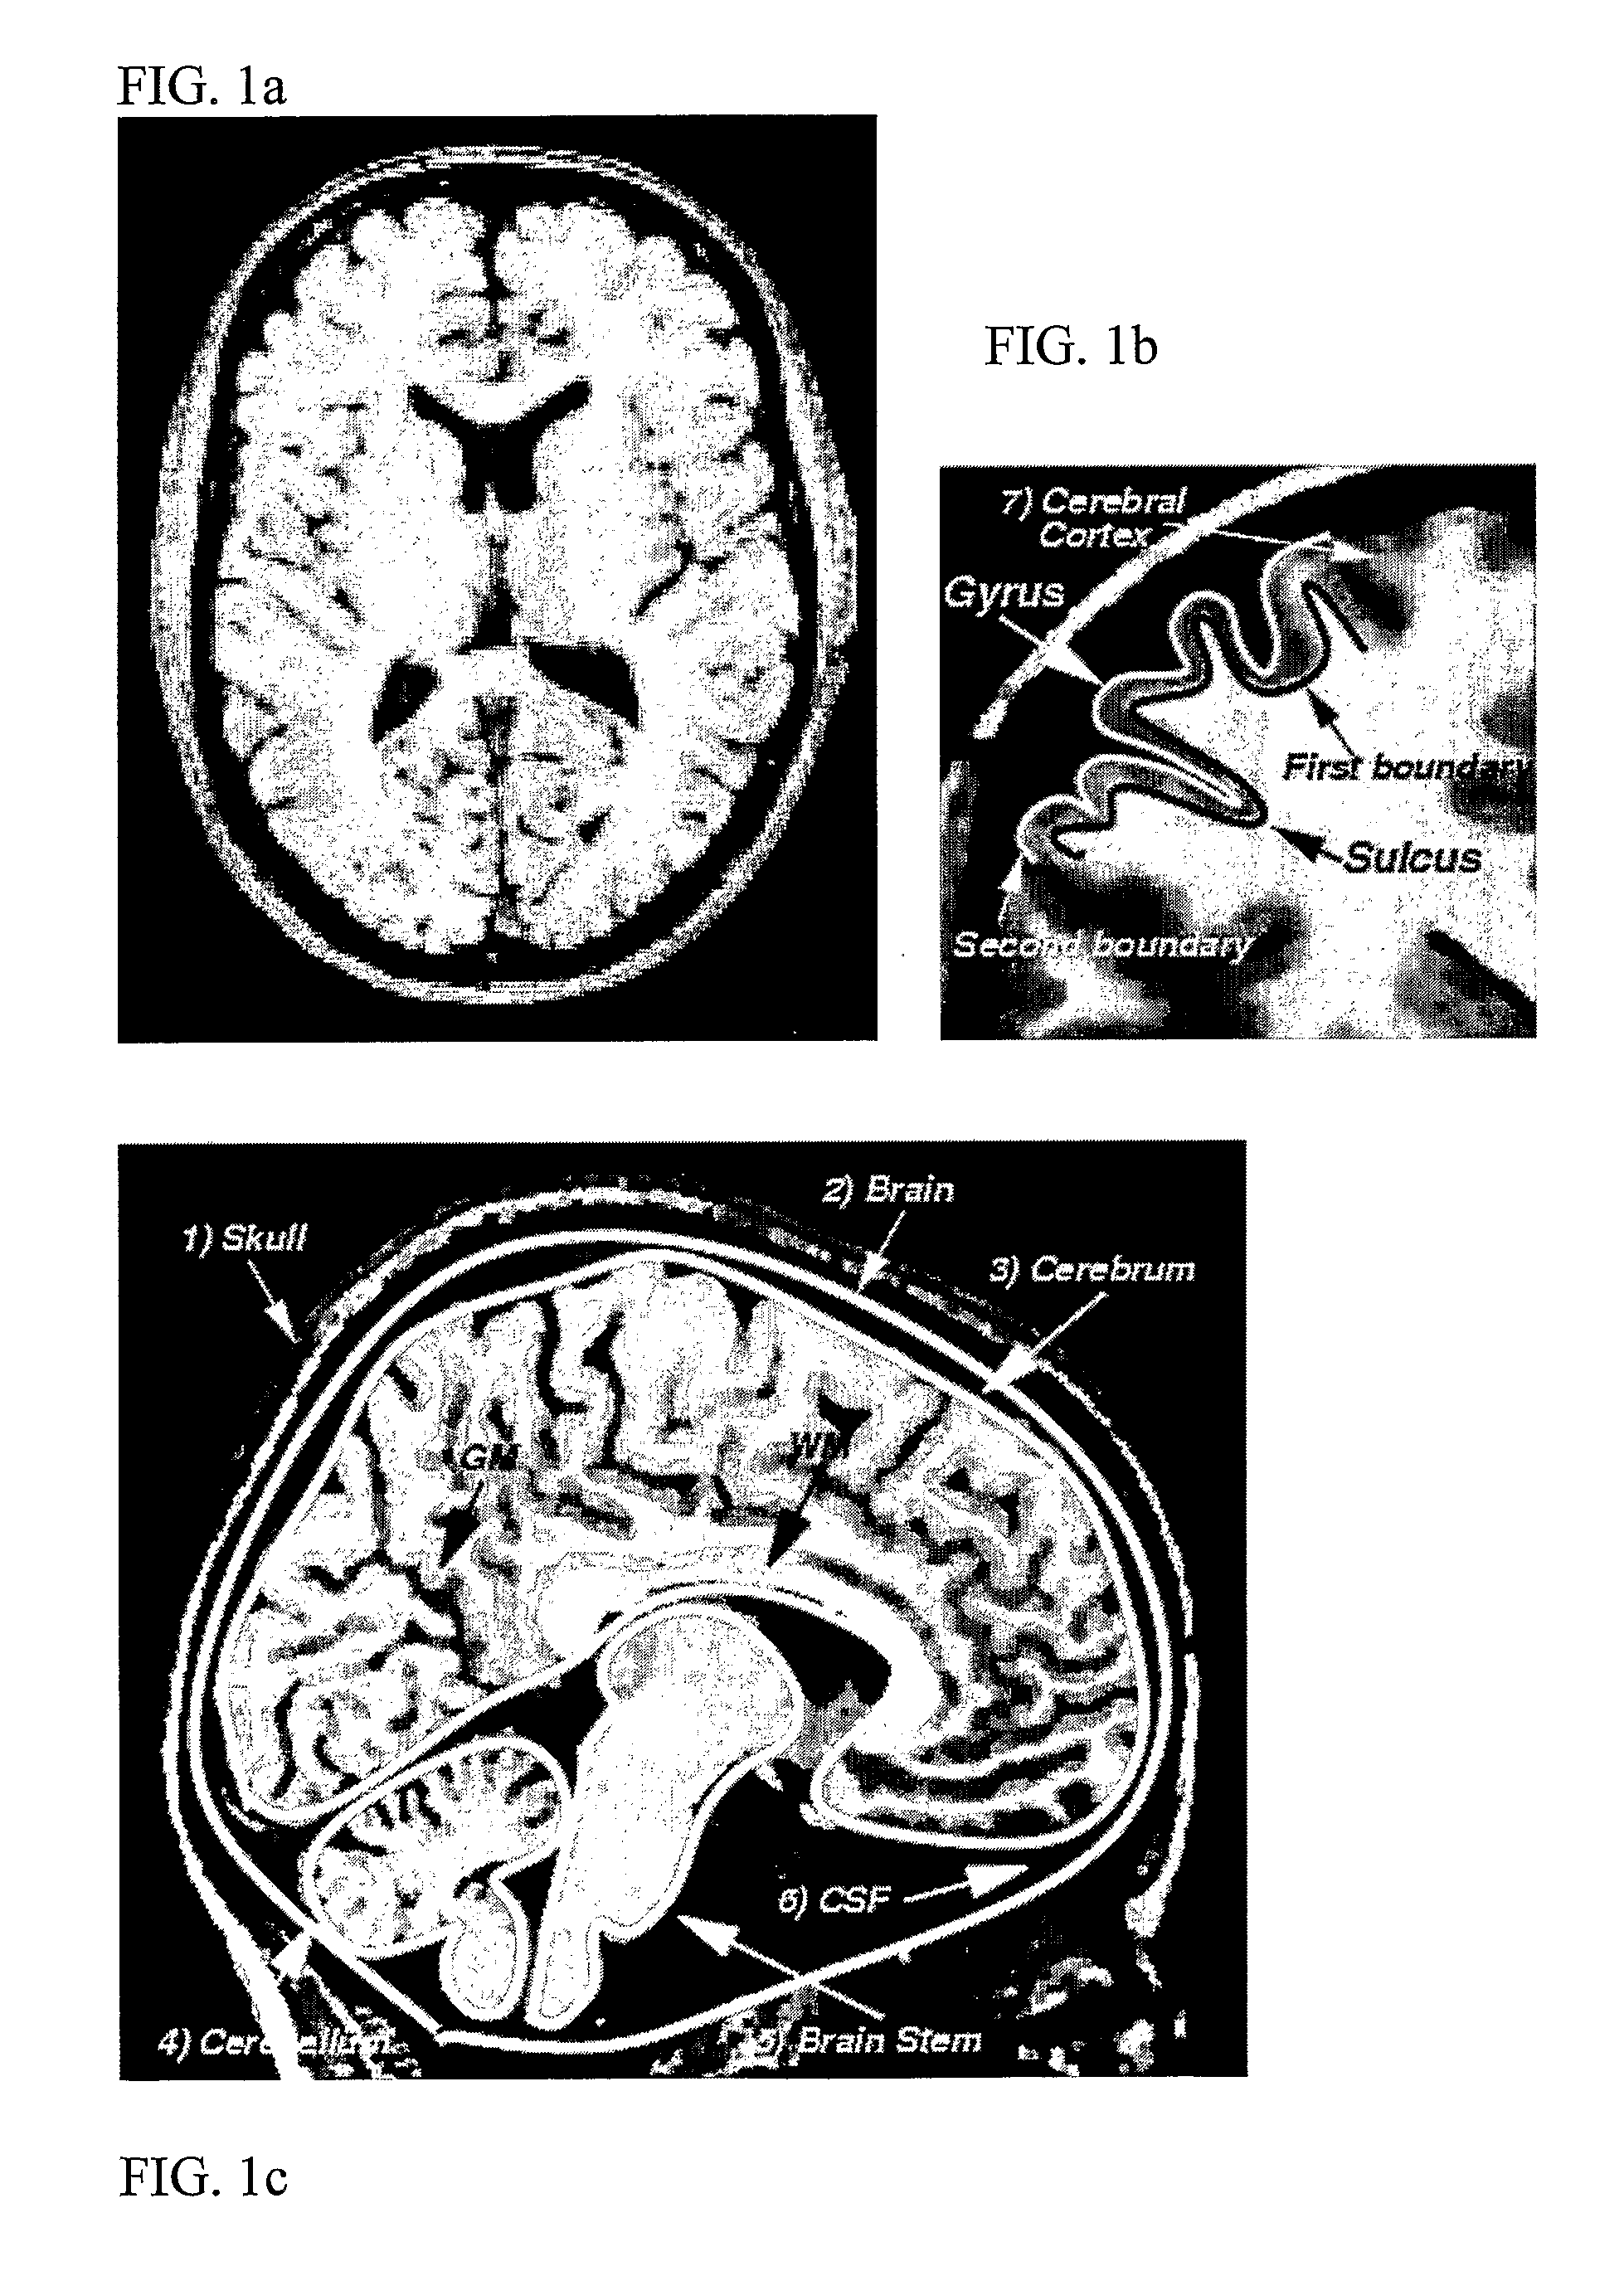 Computerised cortex boundary extraction from MR images